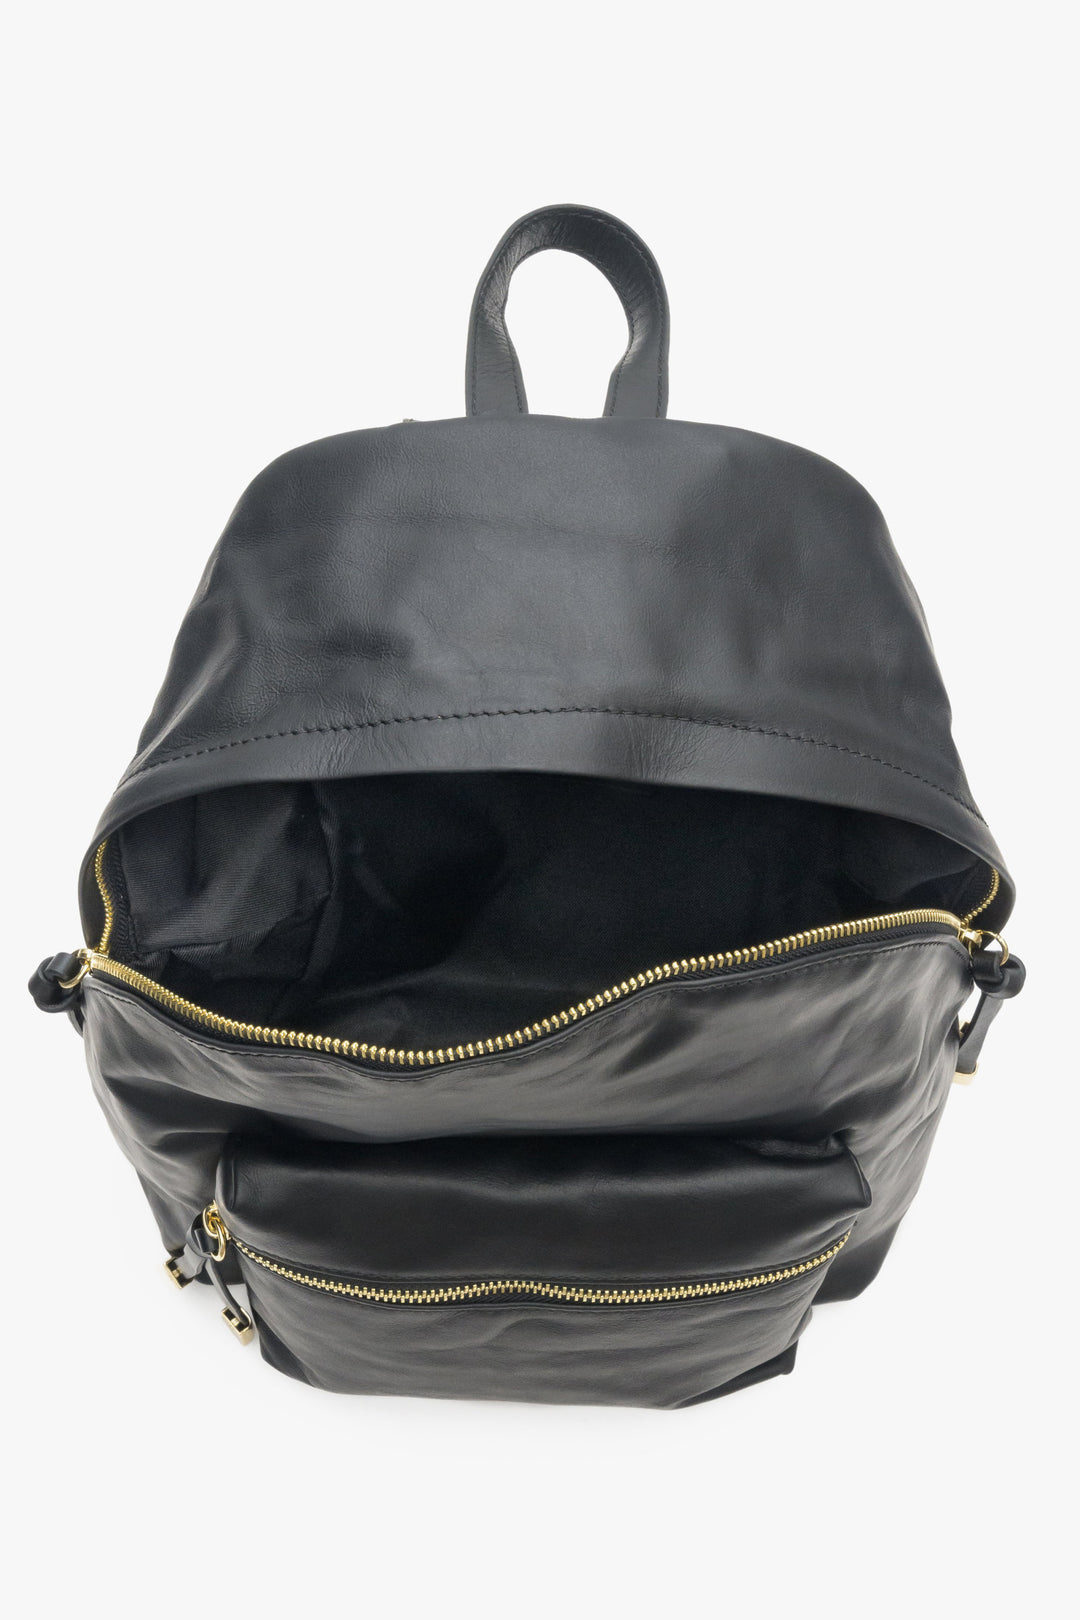 Elegant and capacious women's black backpack purse Estro - close-up on the lining.